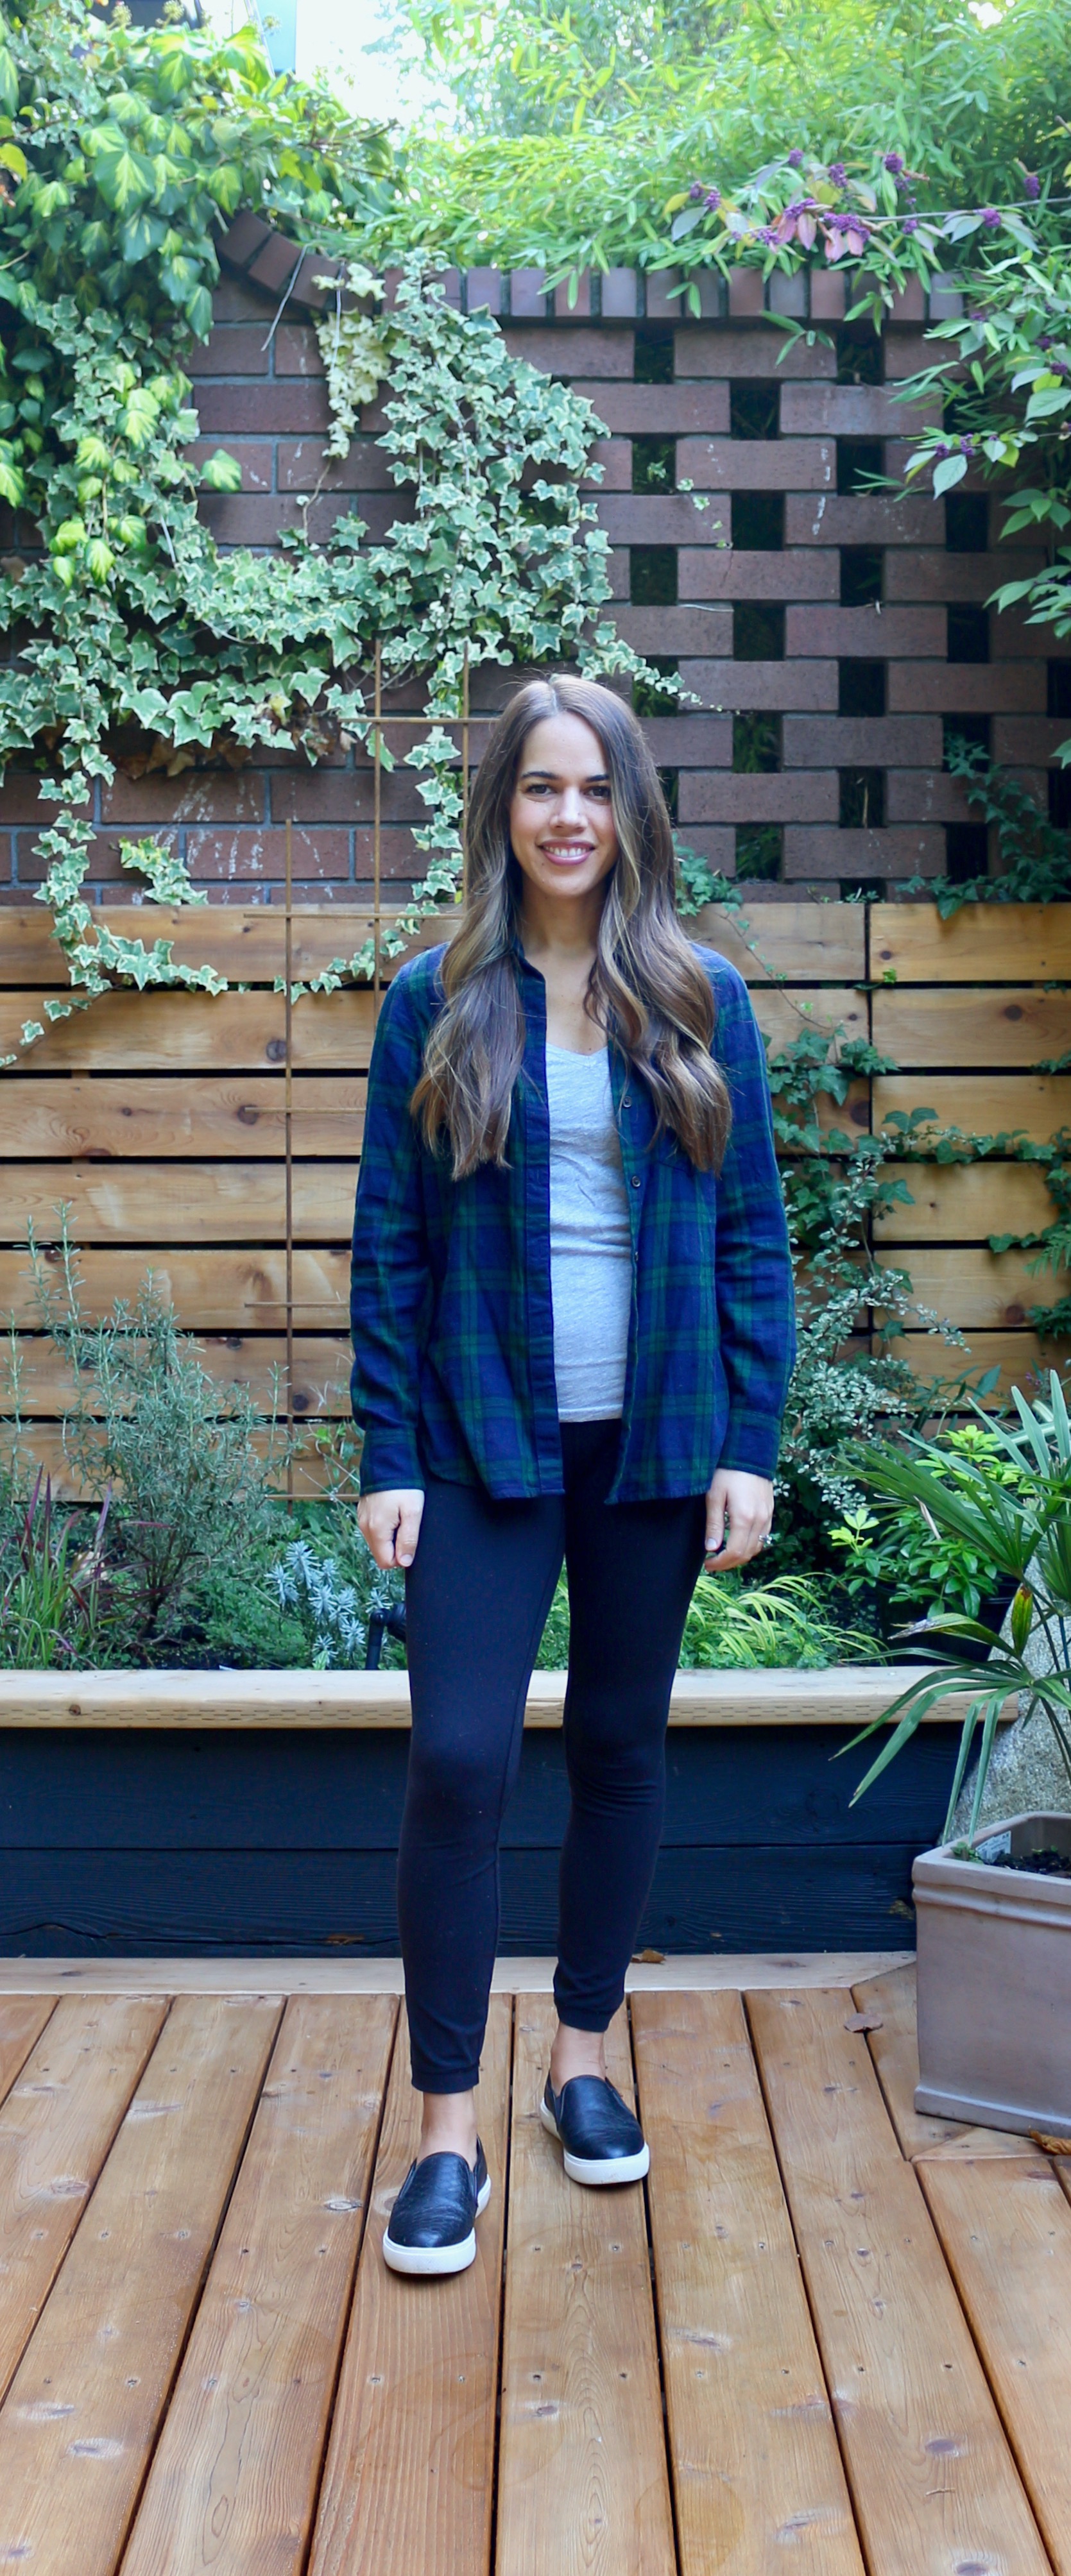 Jules in Flats - WFH Outfit - Plaid Flannel + Leggings (Business Casual Workwear on a Budget)